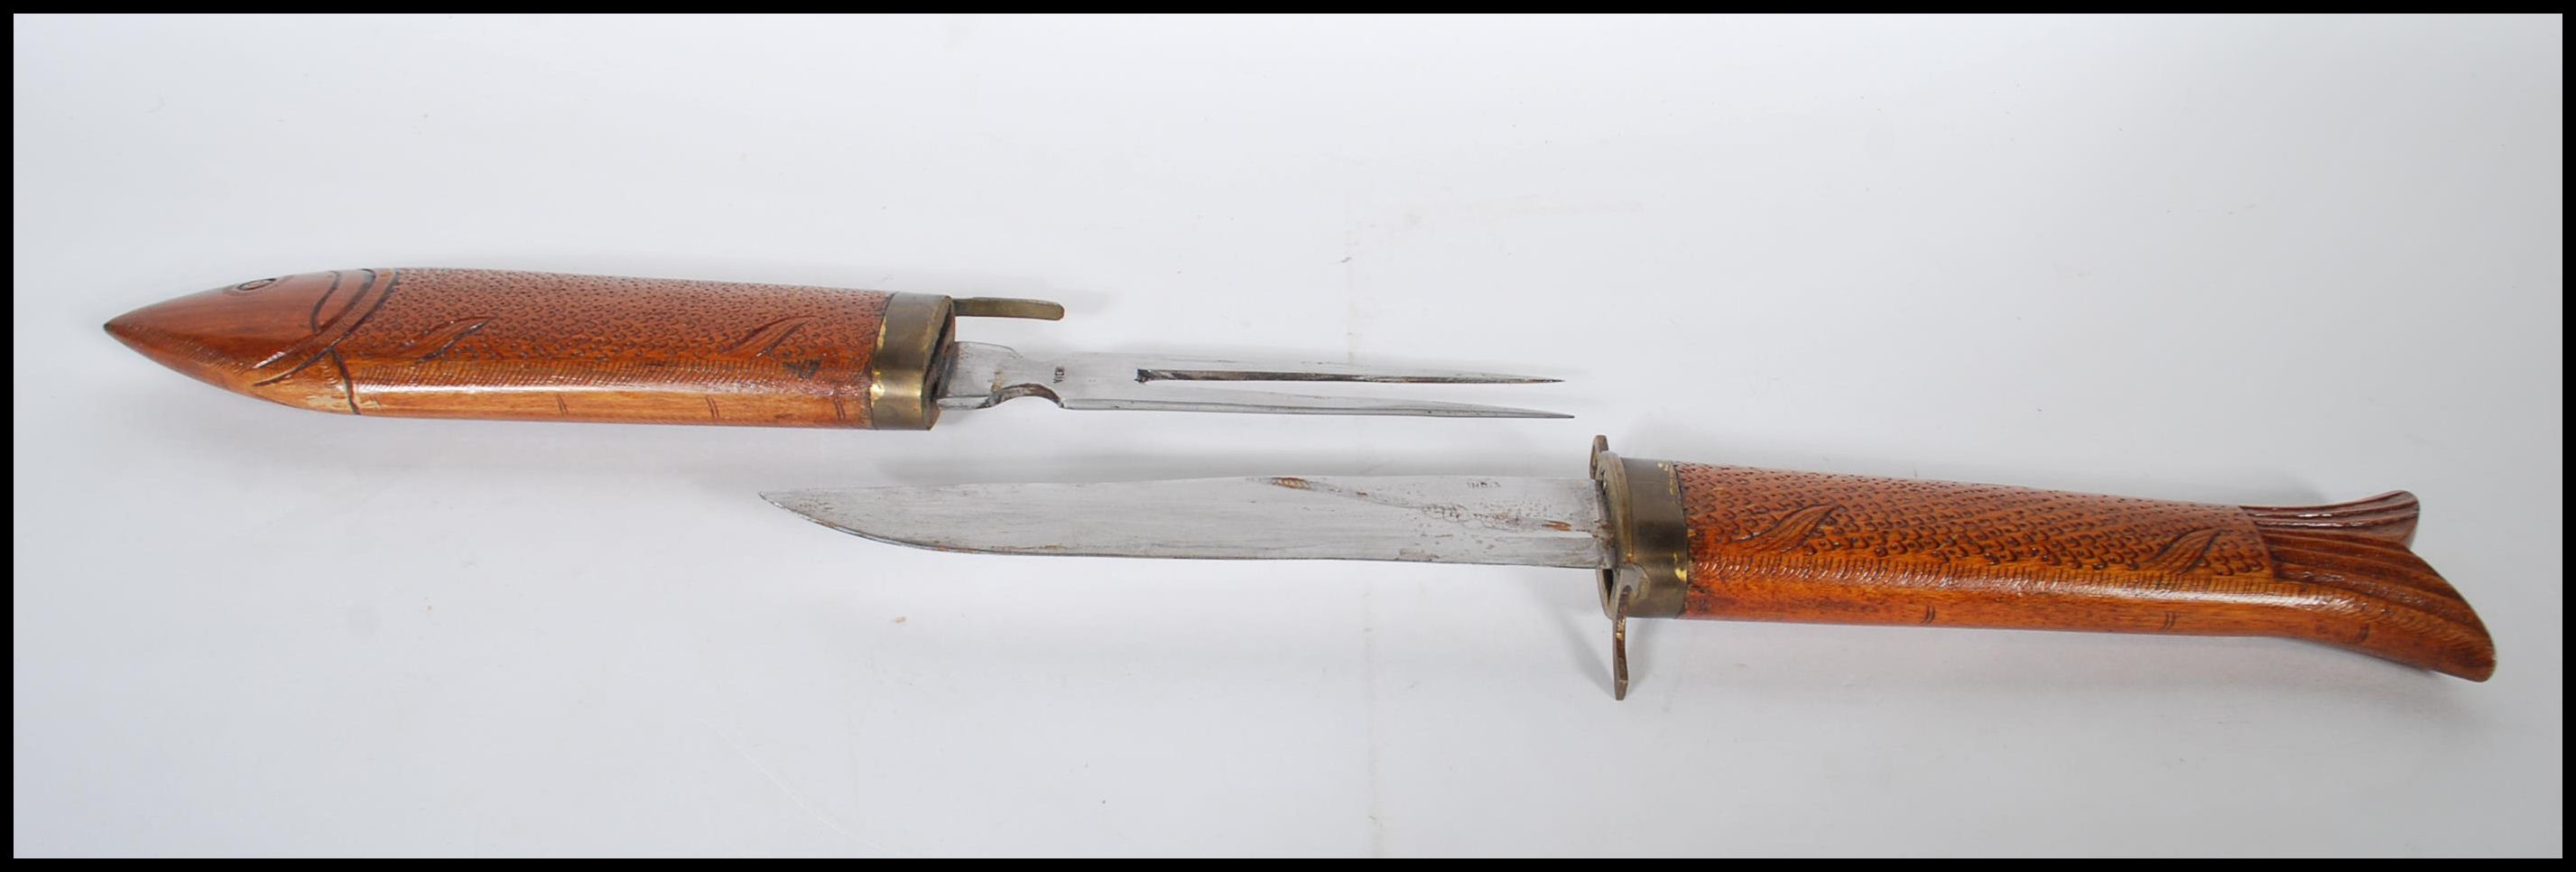 A 20th Century knife and fork carving set, the set carved from hard wood and modelled as a Carp - Image 3 of 4